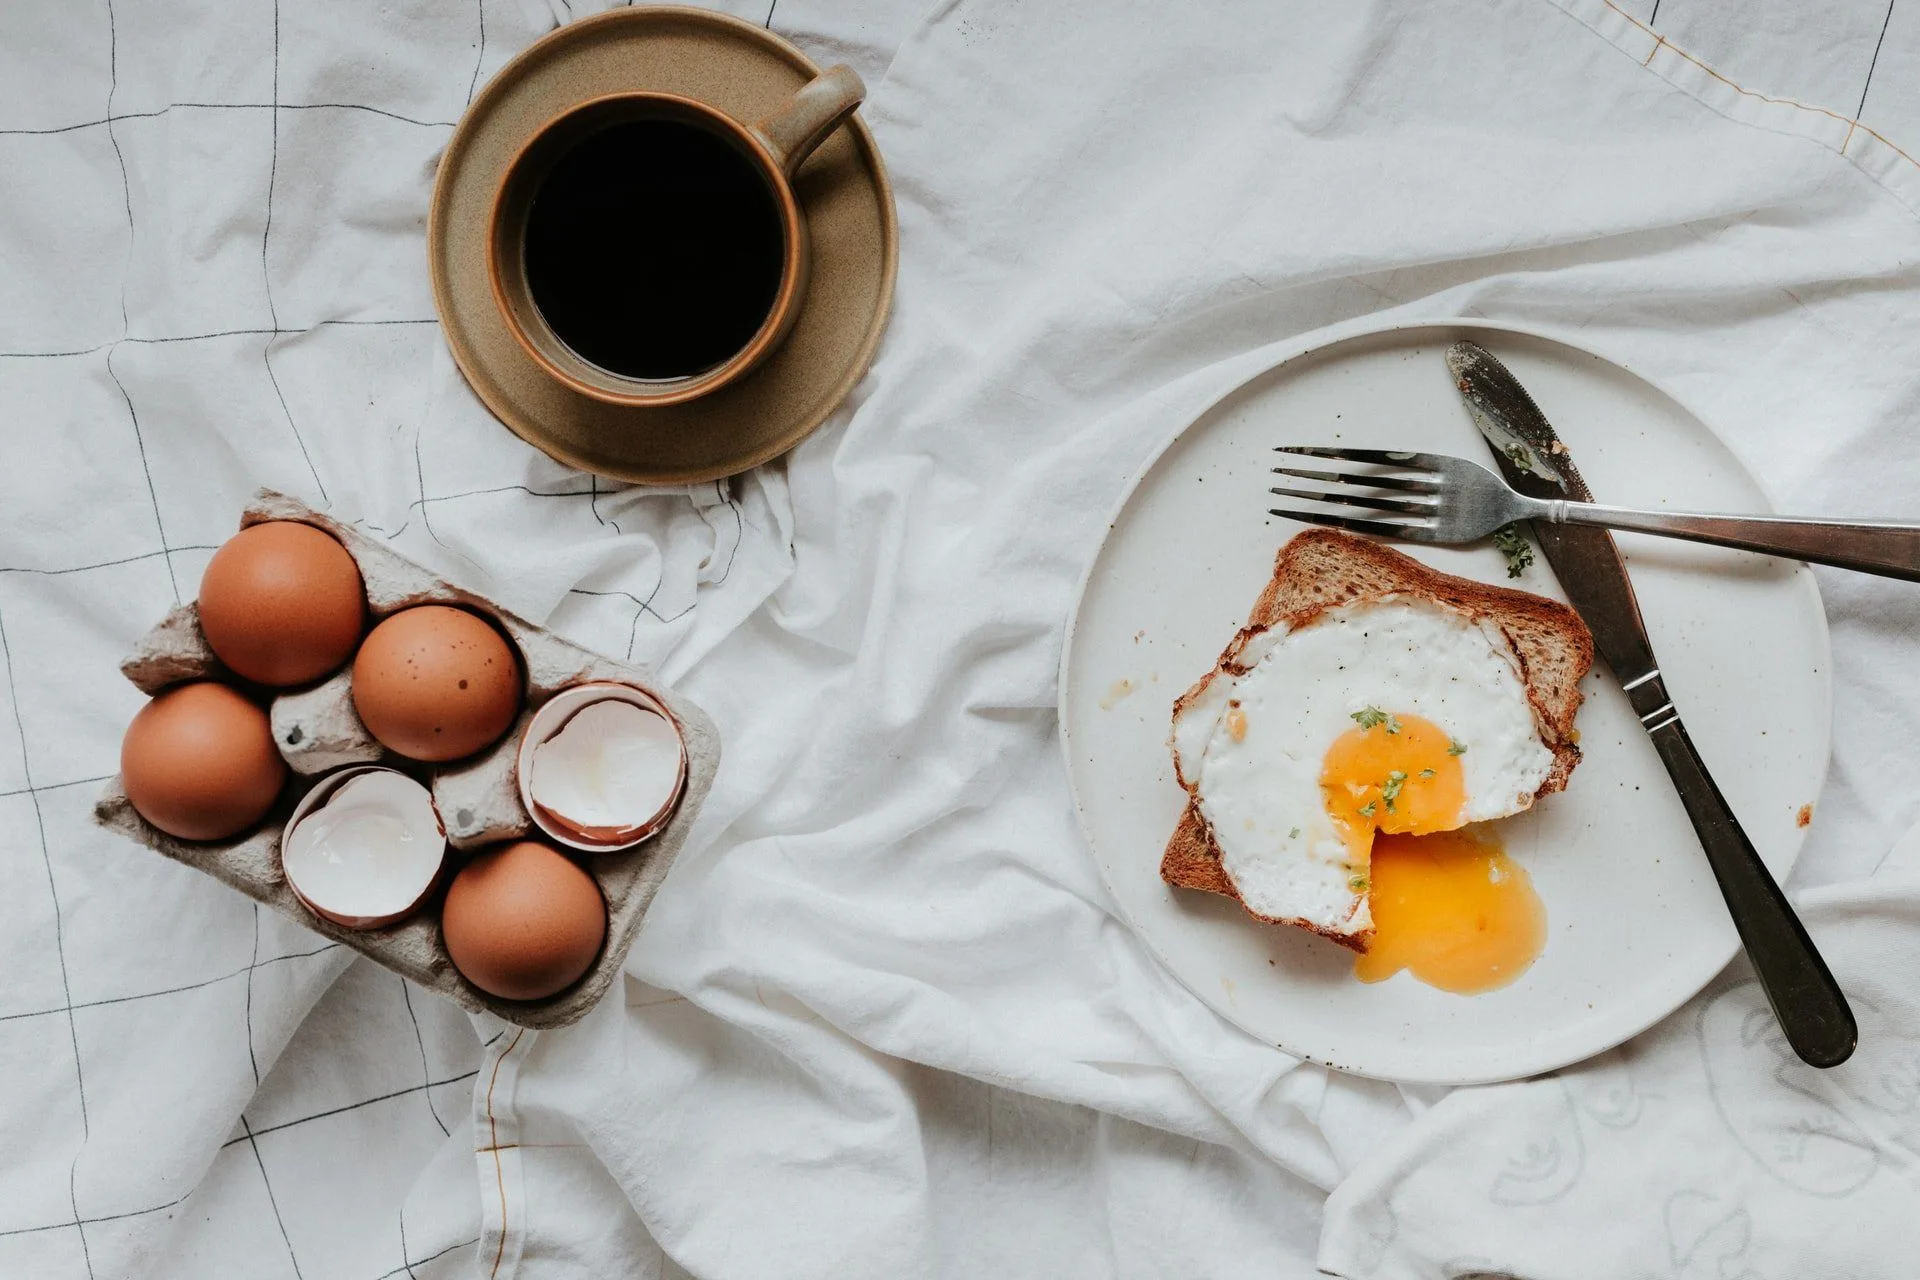 Enjoy More Eggs To Get Your Dose of Vitamin D